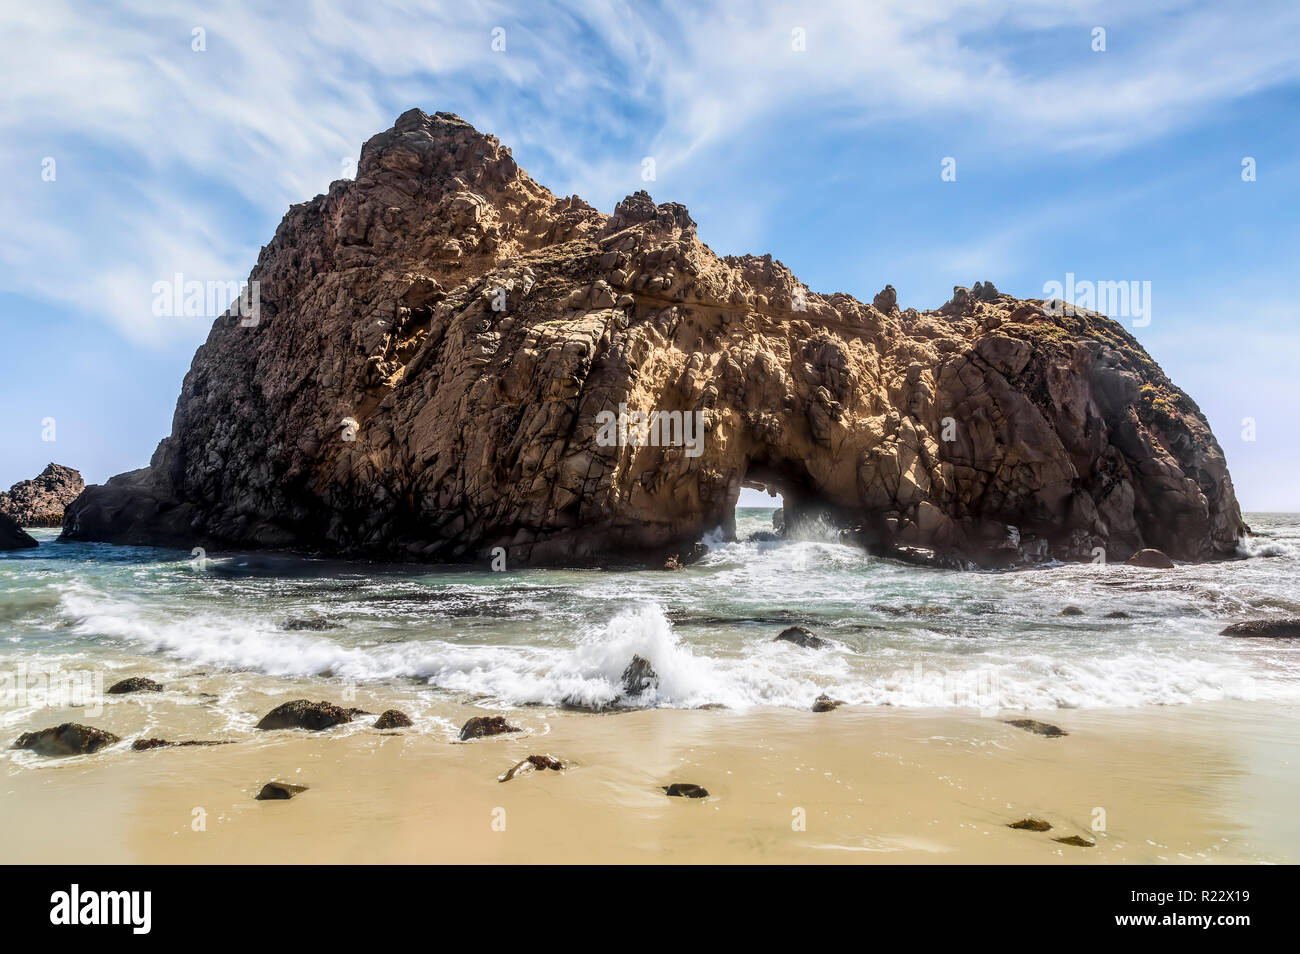 Pacific Ocean waves splash through the iconic Keyhole Arch at Pfeiffer Beach along the Big Sur coast of California. Stock Photo